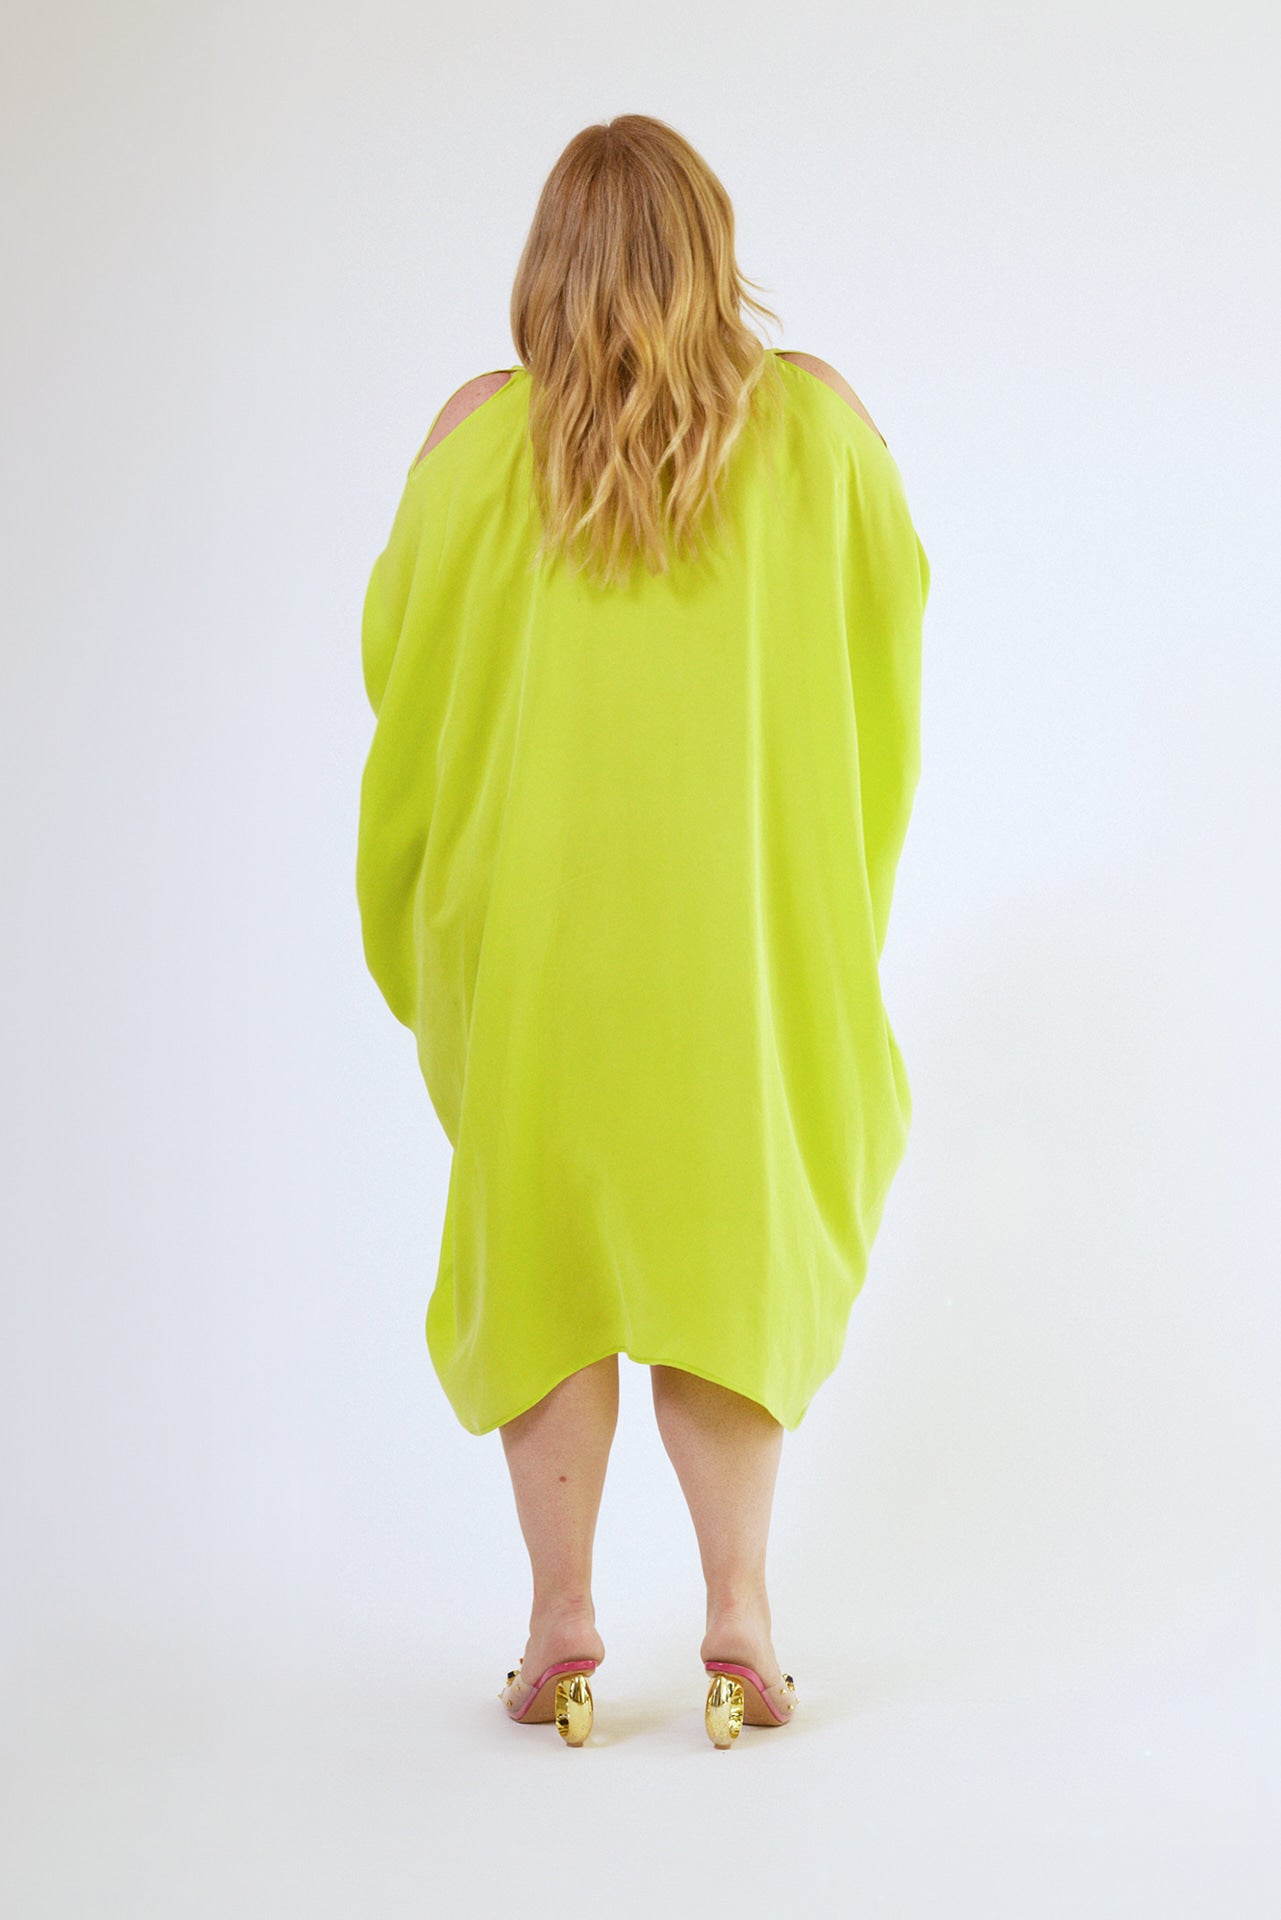 back view of woman wearing bright yellow kaftan duster with front zipper made from recycled materials 6